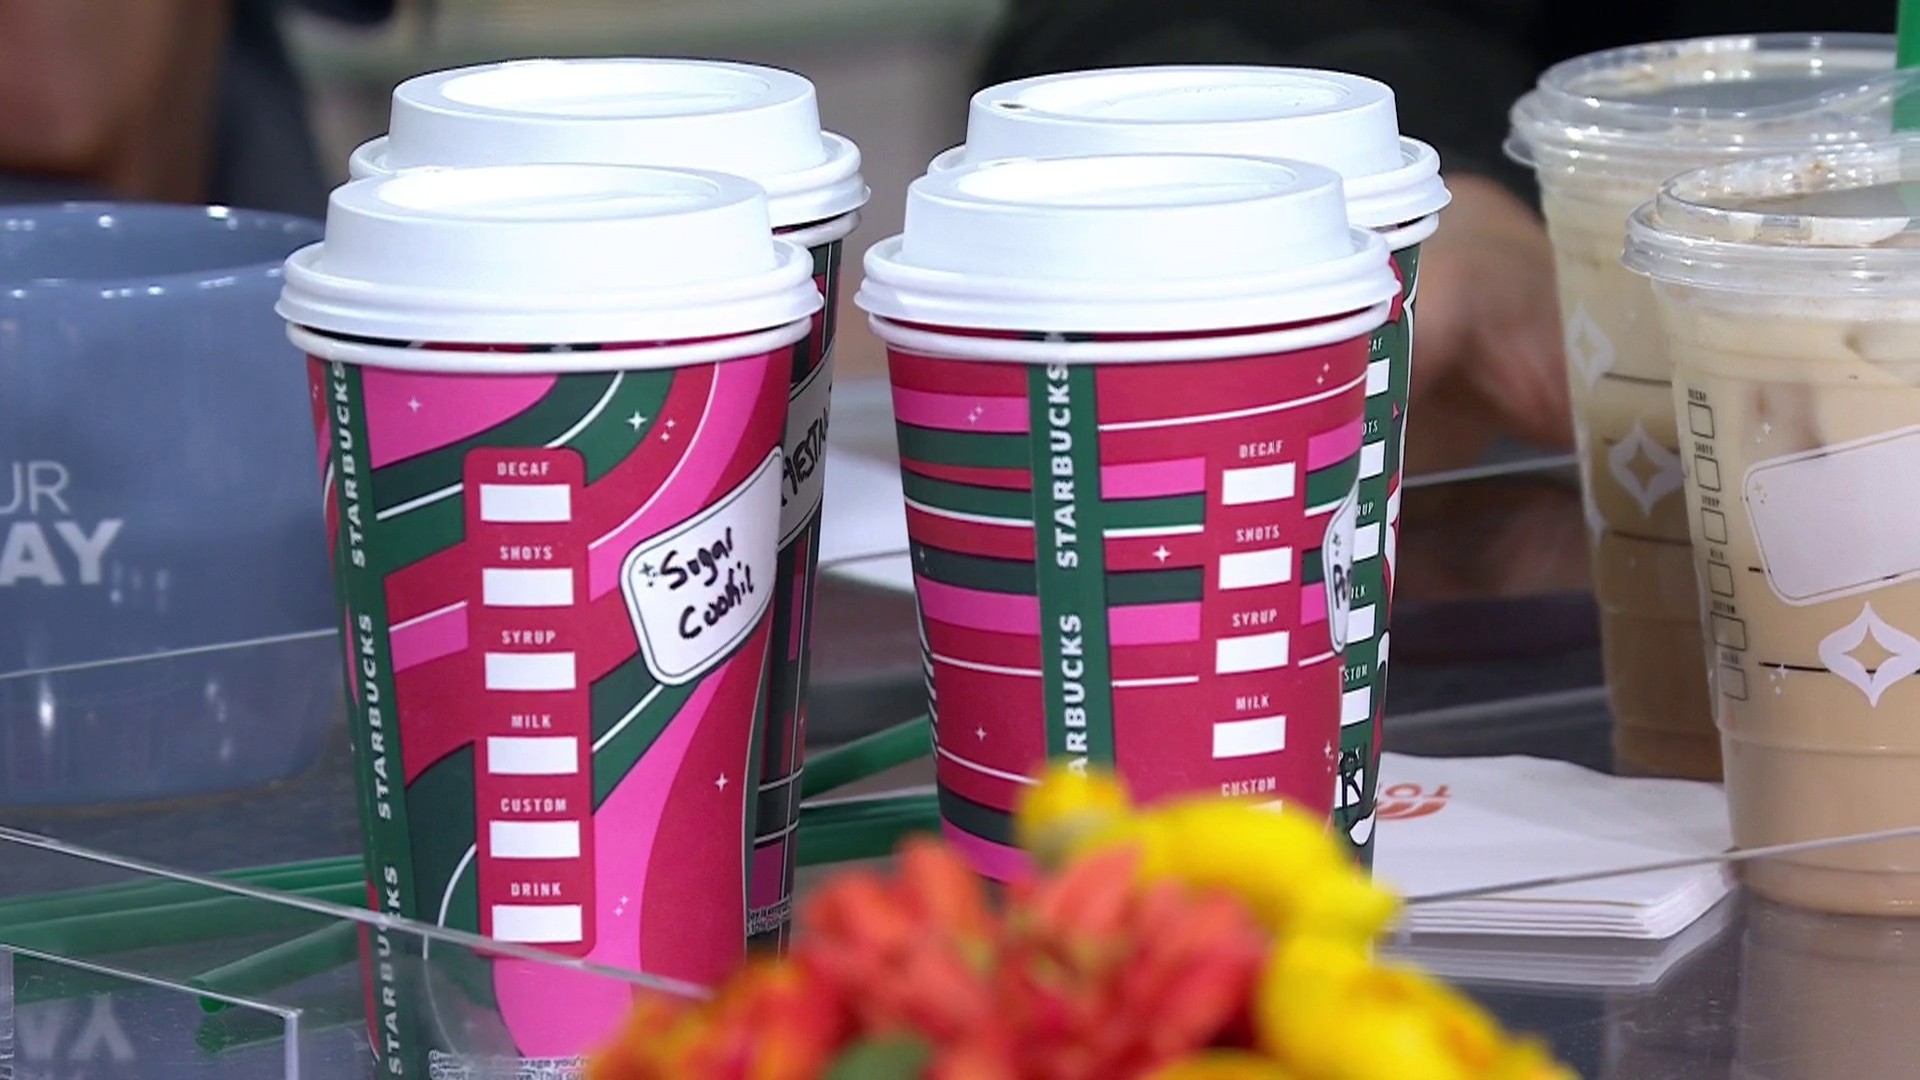 What You Should Know About Starbucks' Holiday Drinks